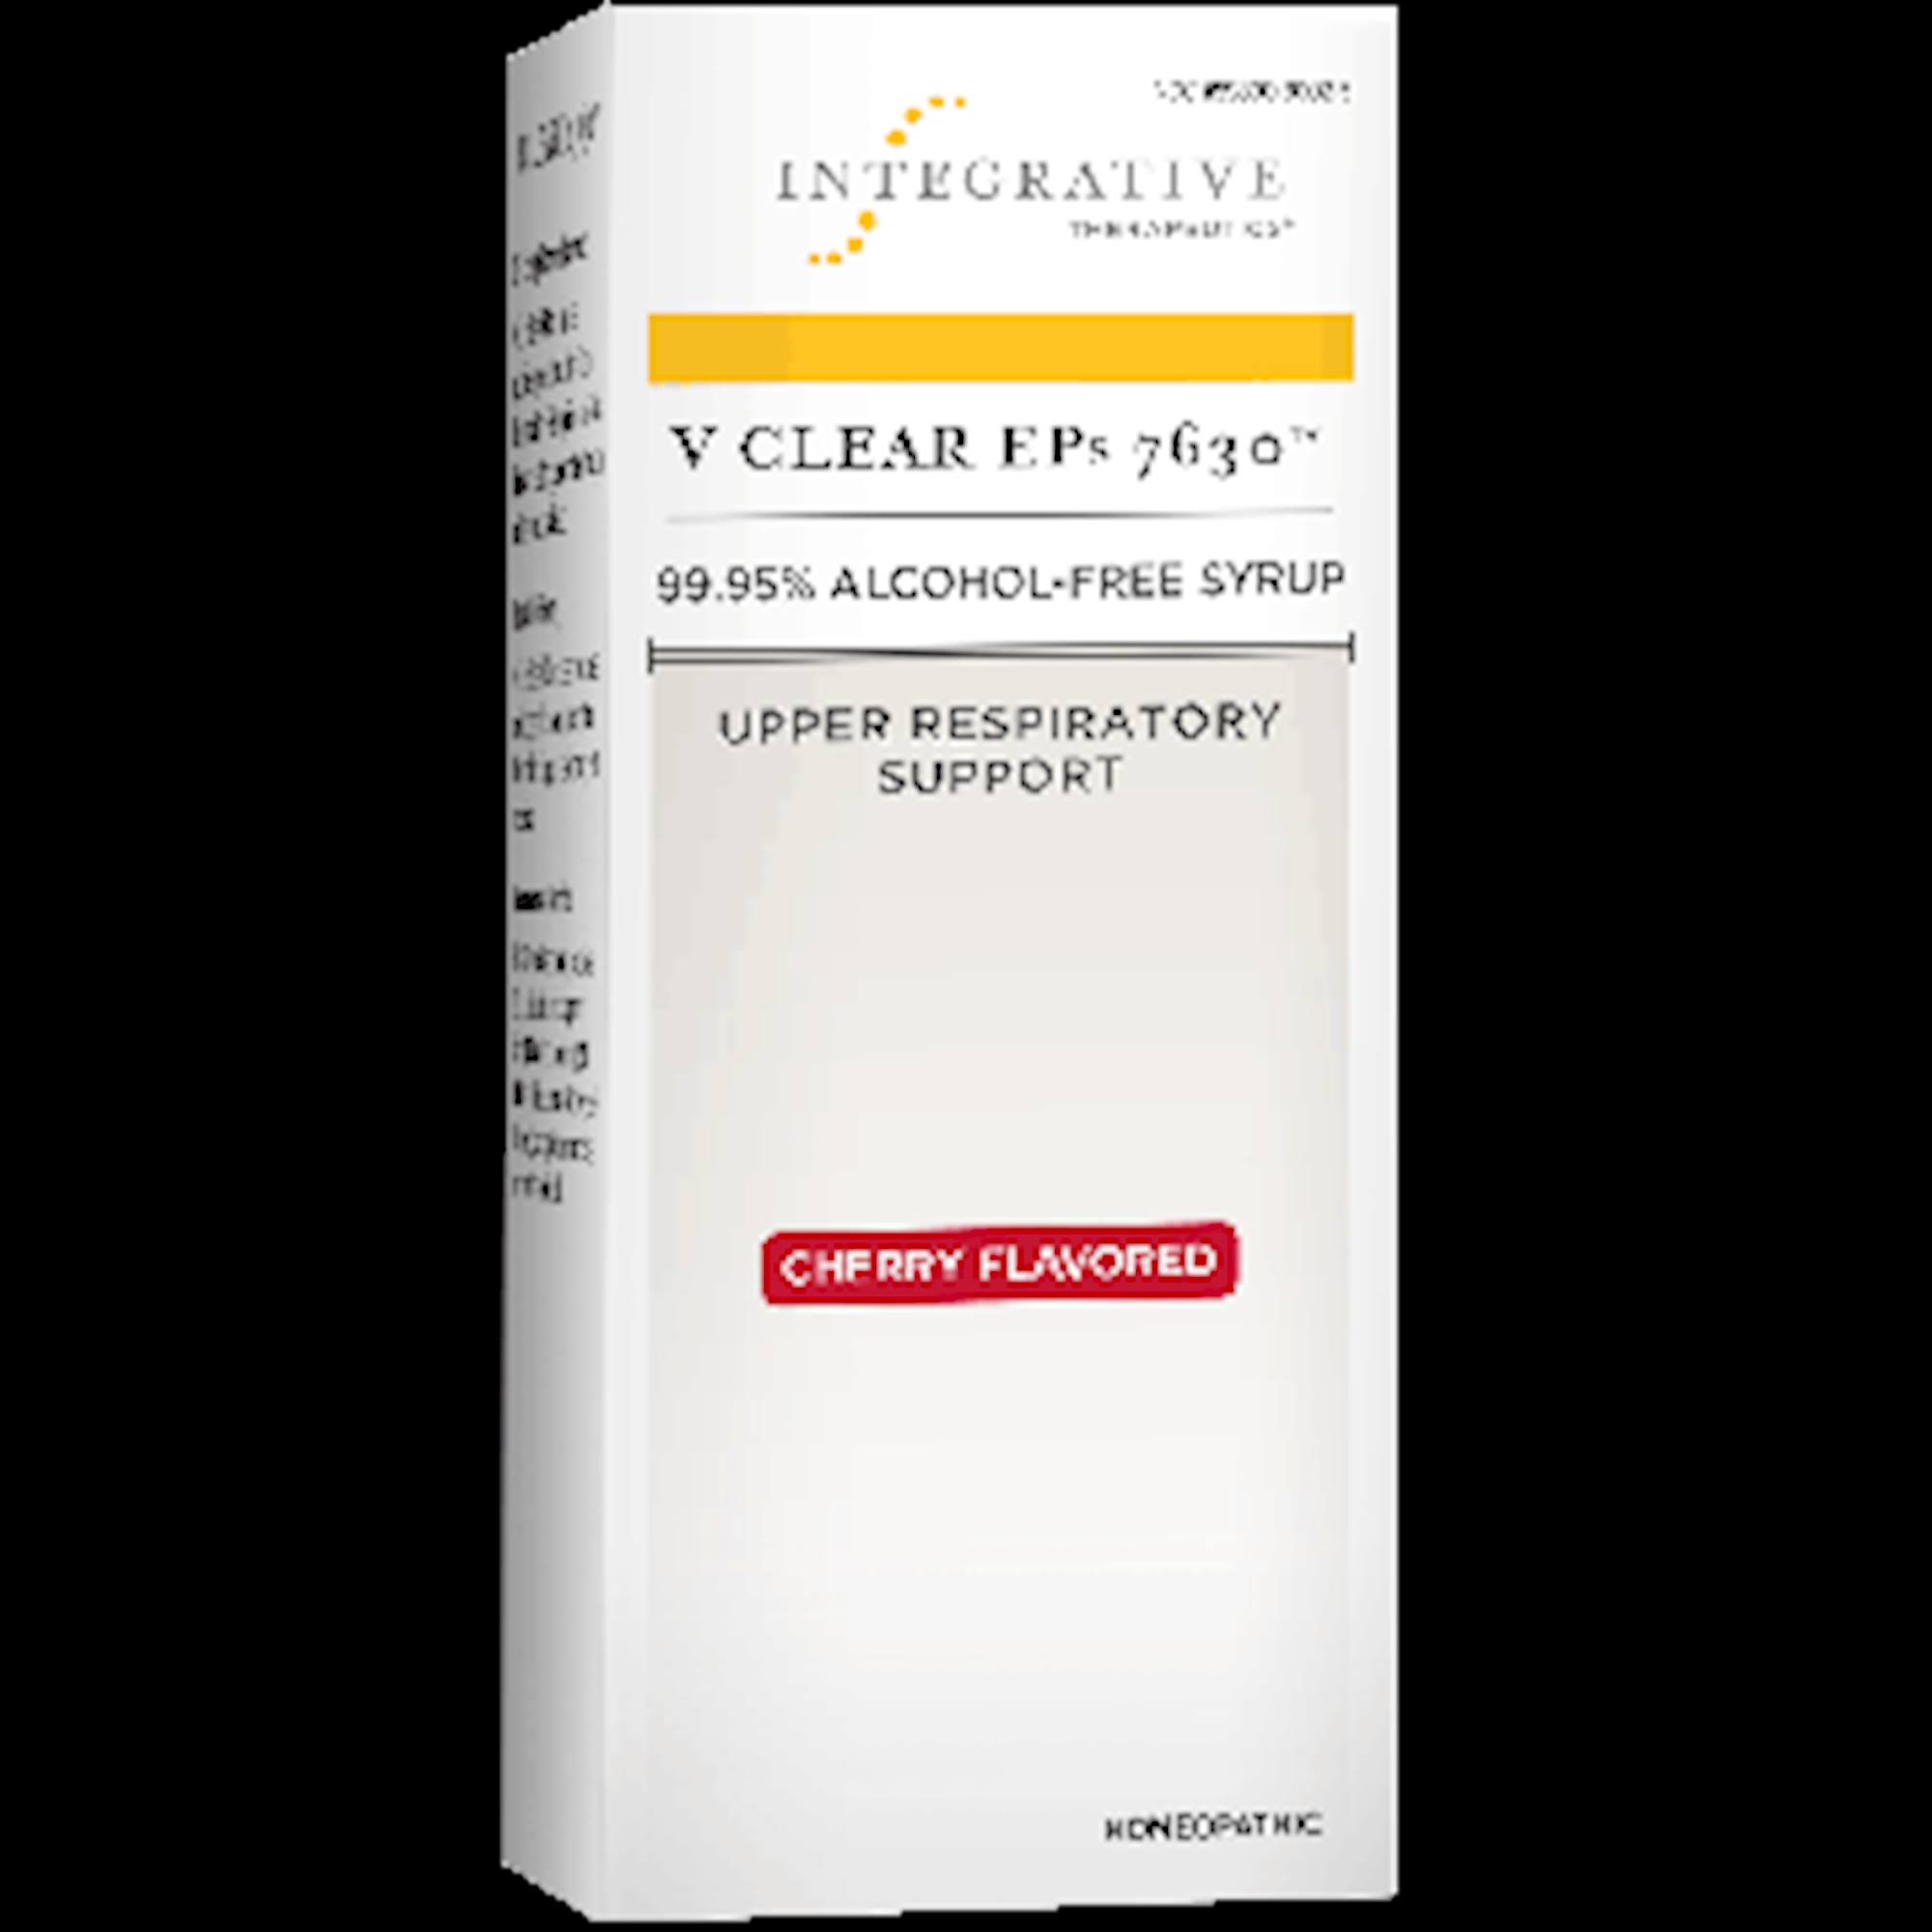 Integrative Therapeutics V Clear EPs 7630 Cough Syrup - Cherry Flavor, 4oz